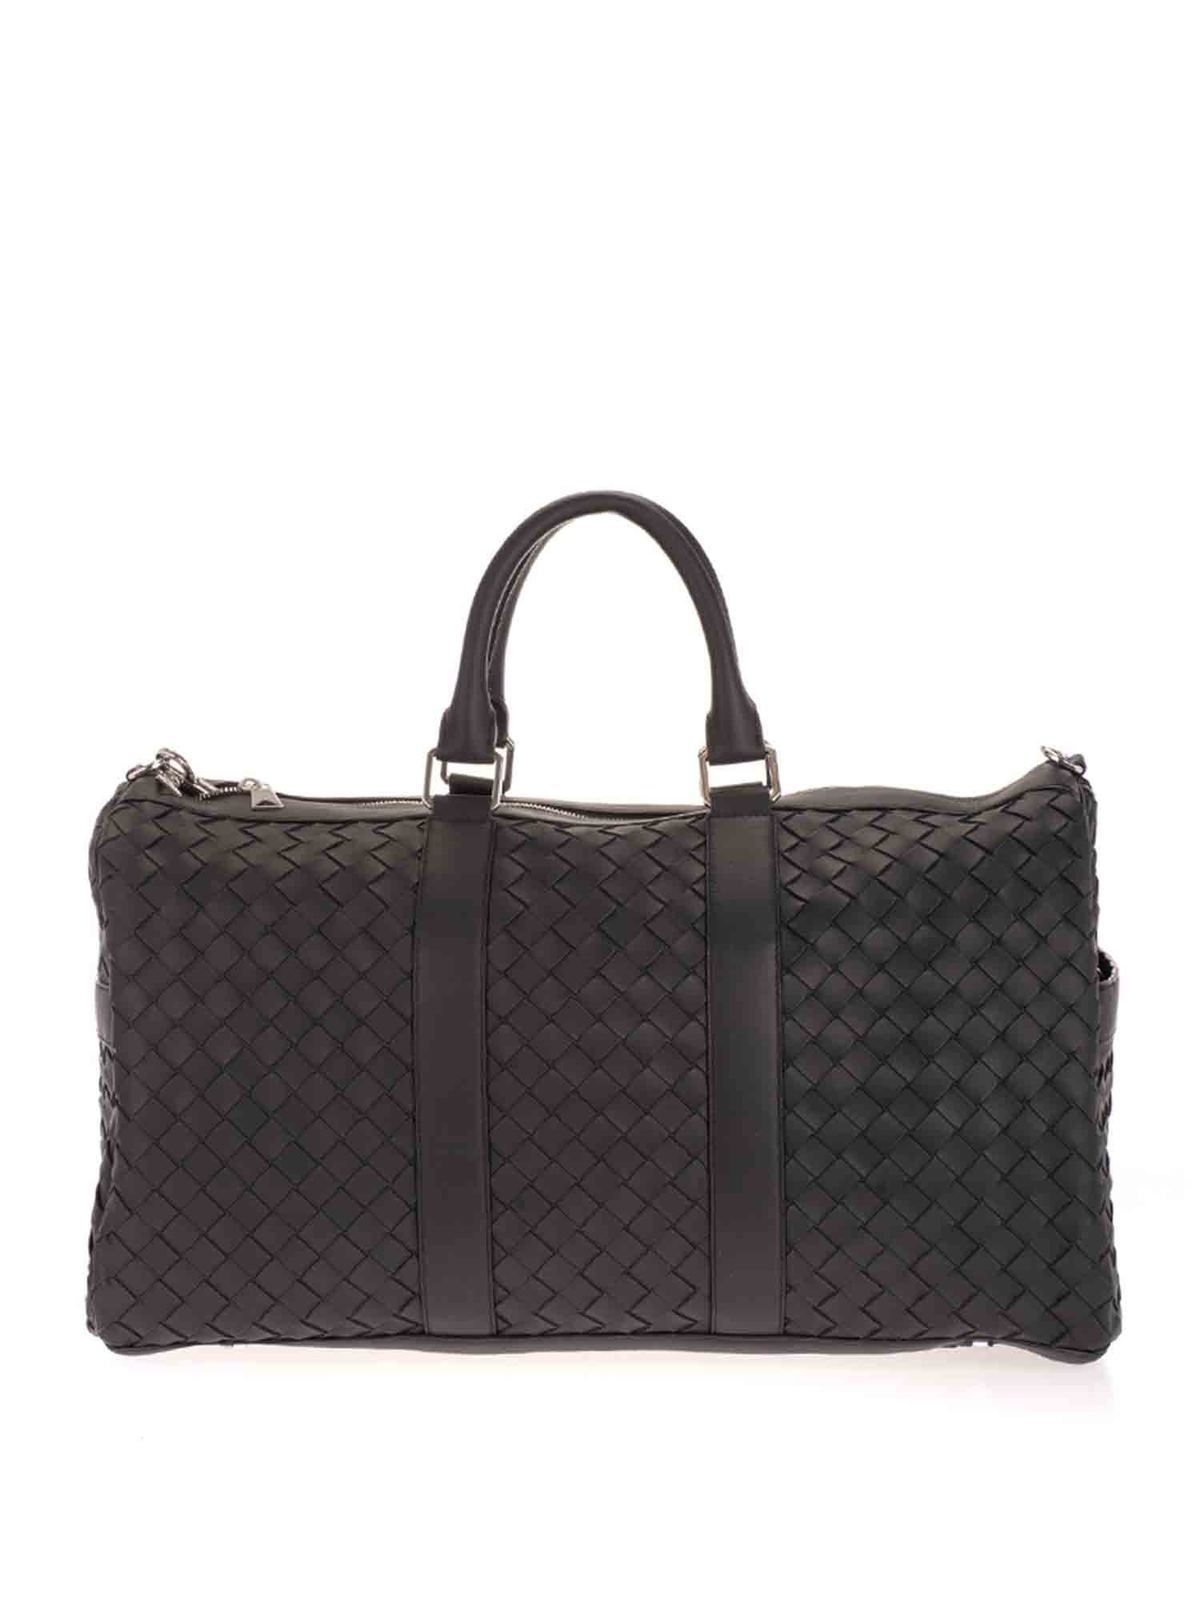 Leather Travel Duffle Bag for Men, Woven Carry On